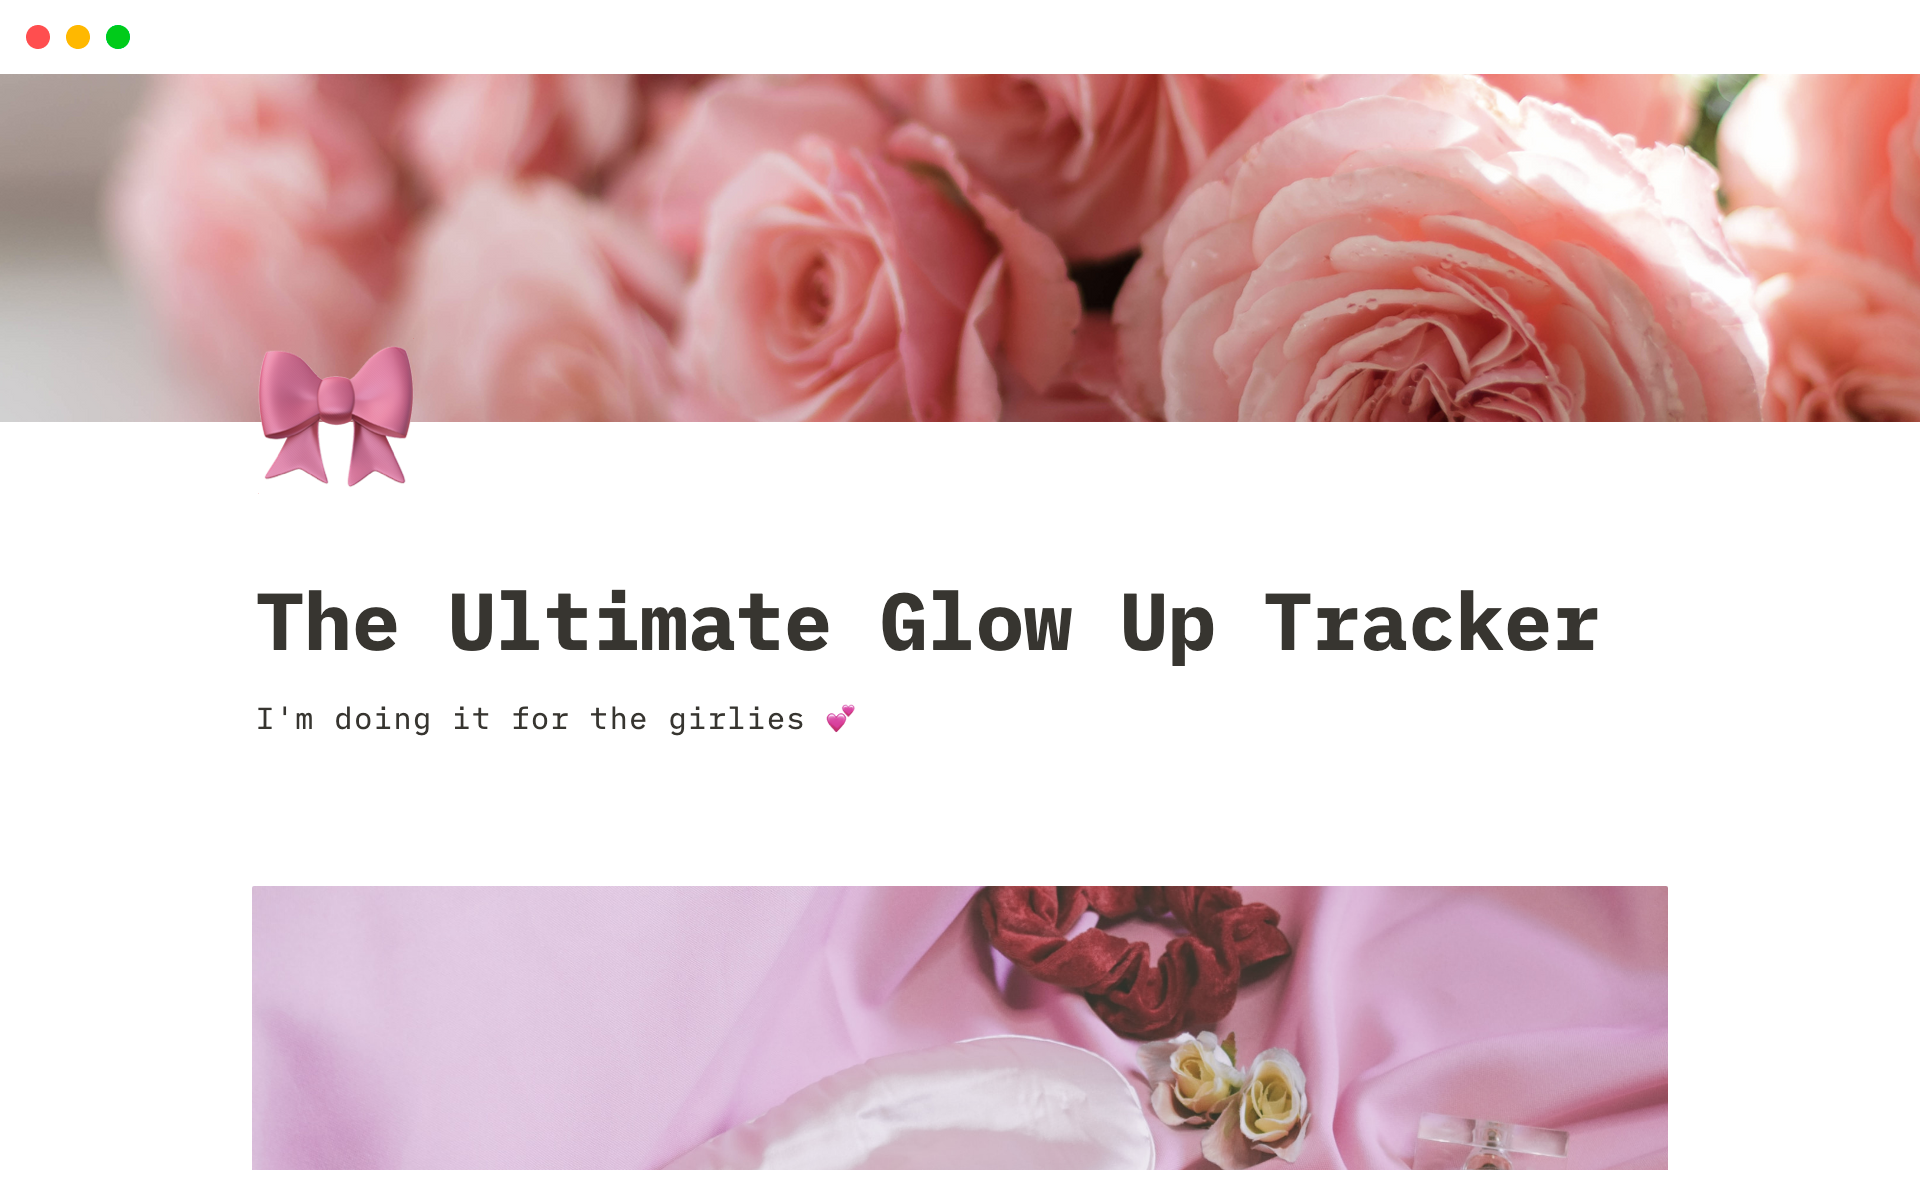 This template offers a place to track your glow up, along with some tips.